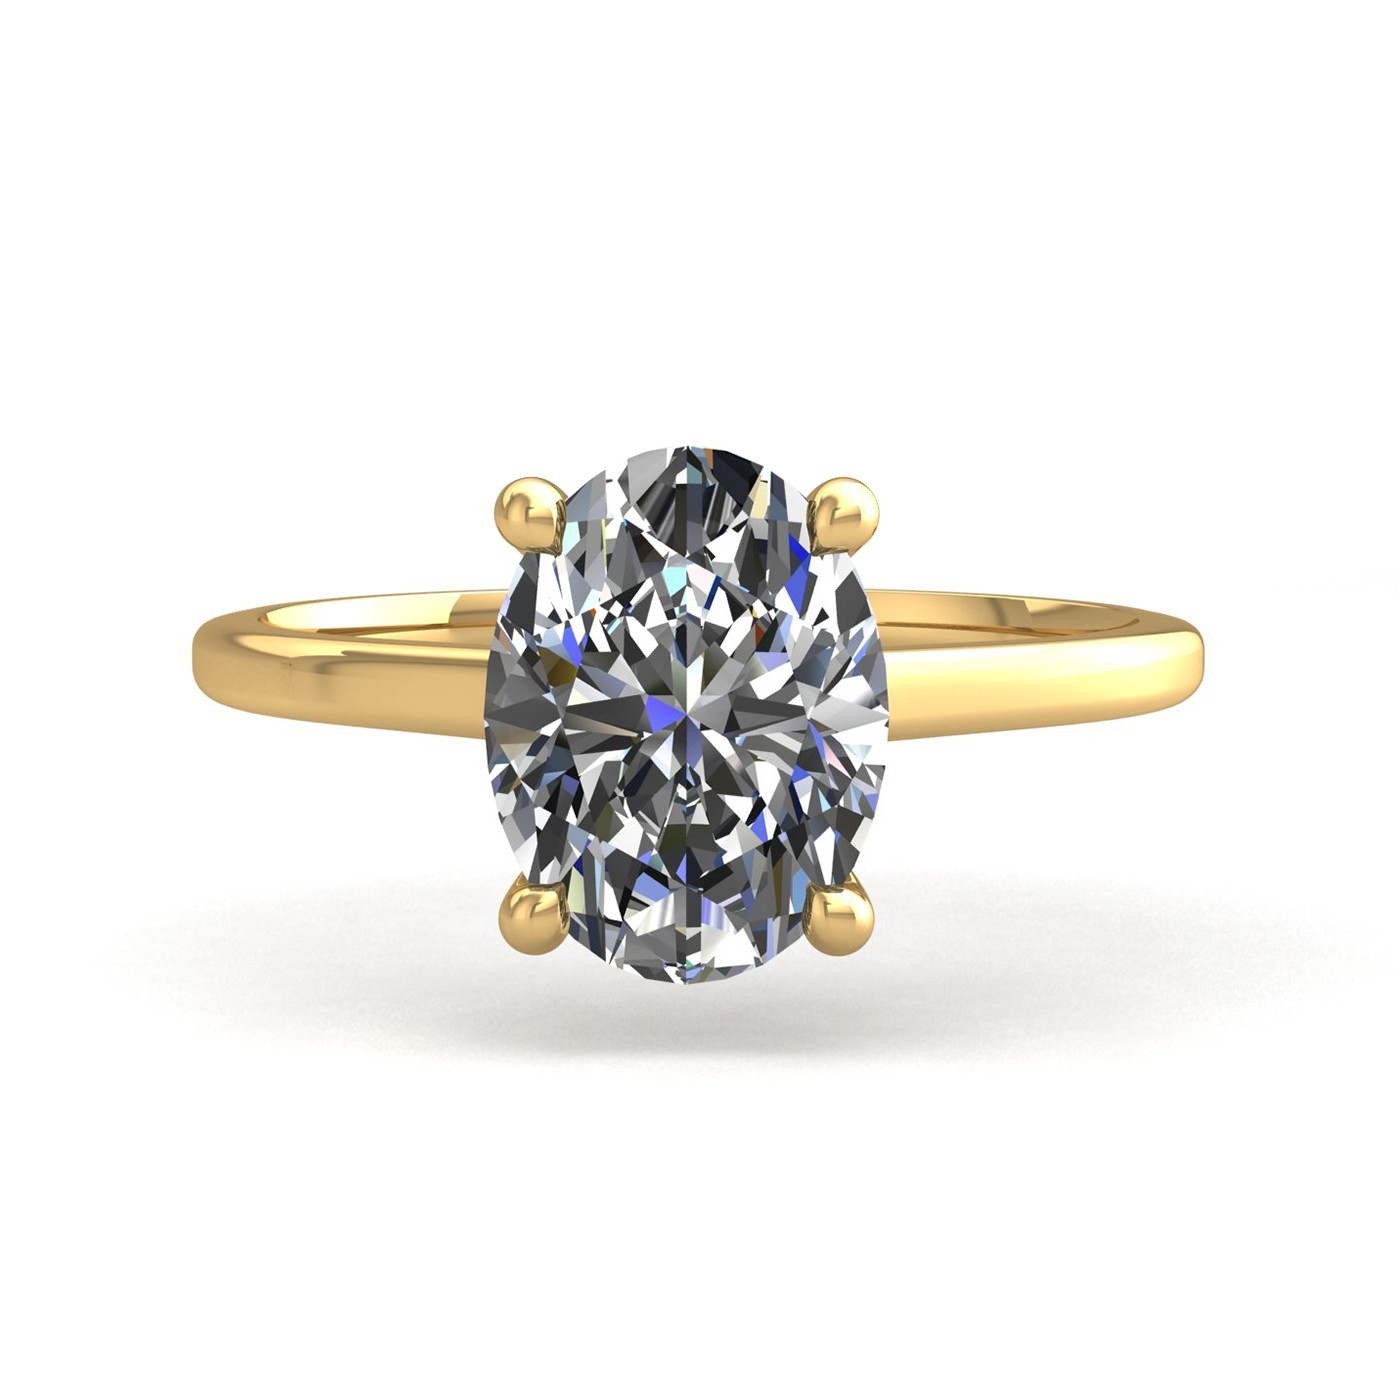 18k yellow gold  1,20 ct 4 prongs solitaire oval cut diamond engagement ring with whisper thin band Photos & images